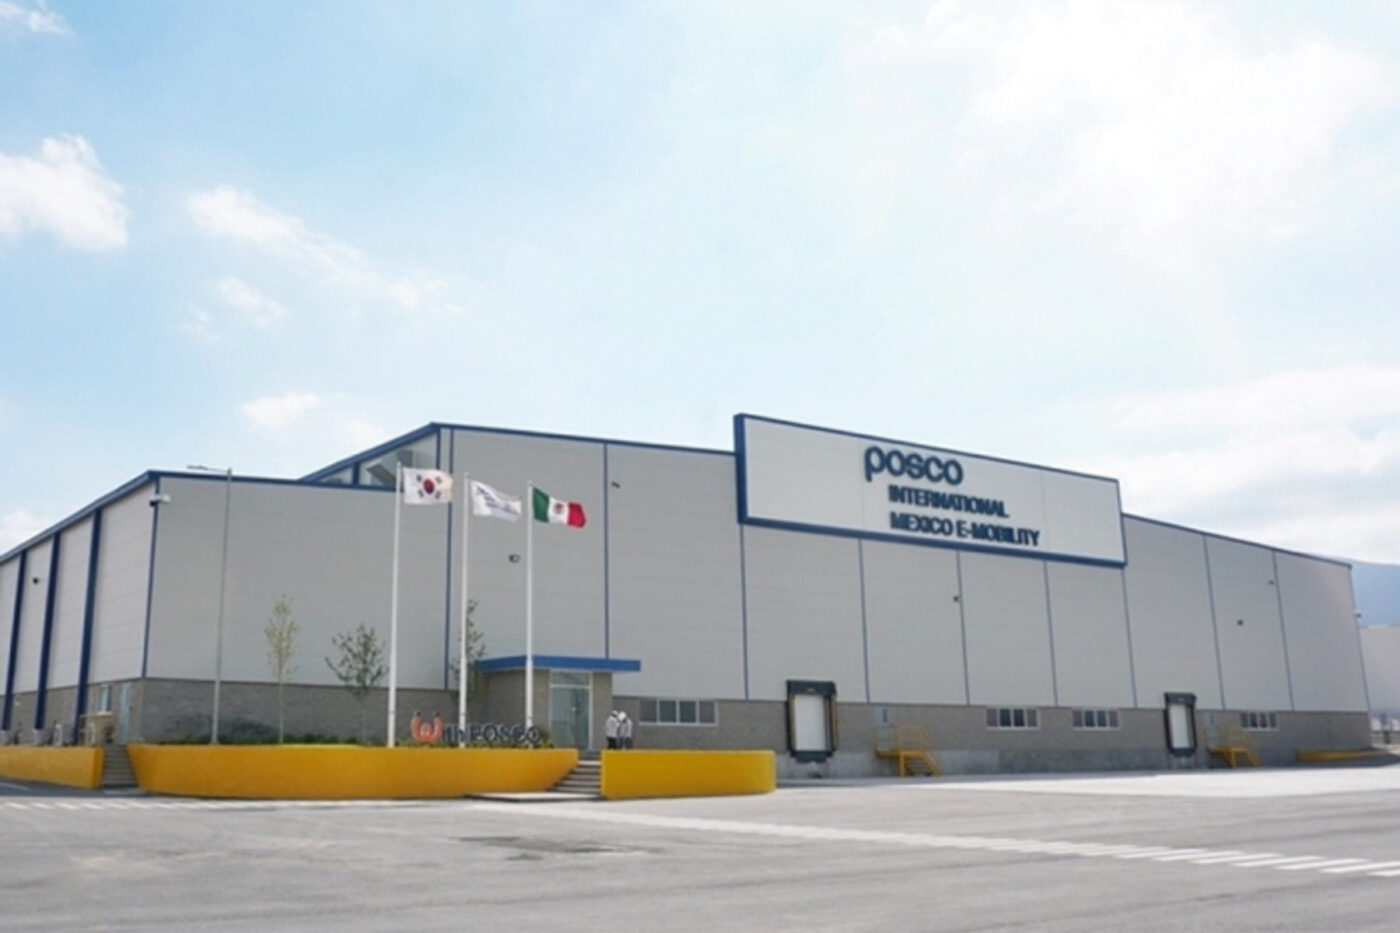 Posco starts up production at drive plant in Mexico